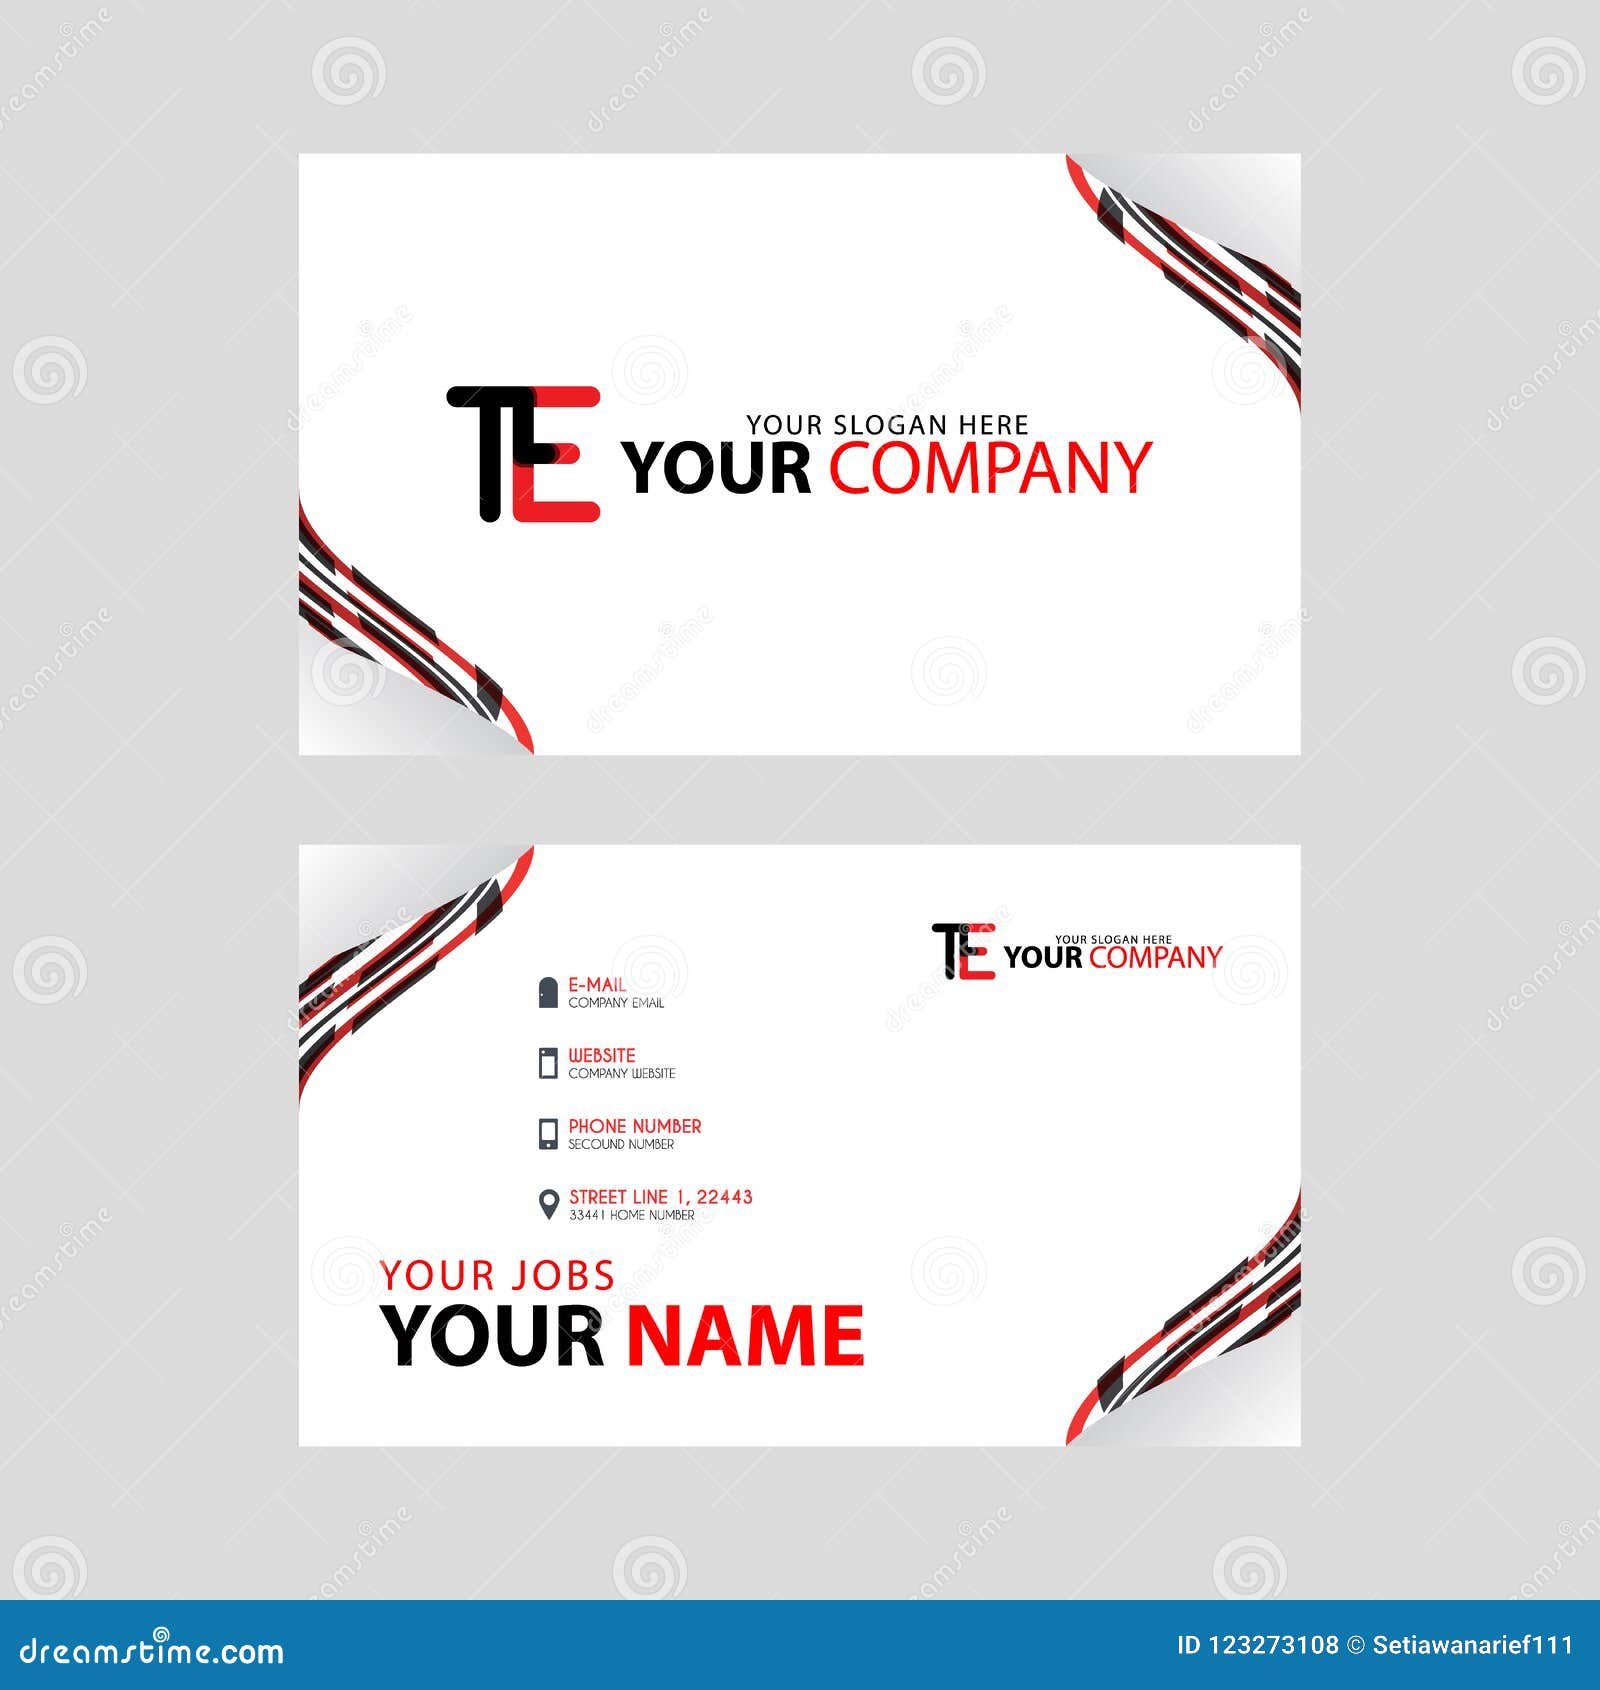 The TE Logo on the Red Black Business Card with a Modern Design is ...